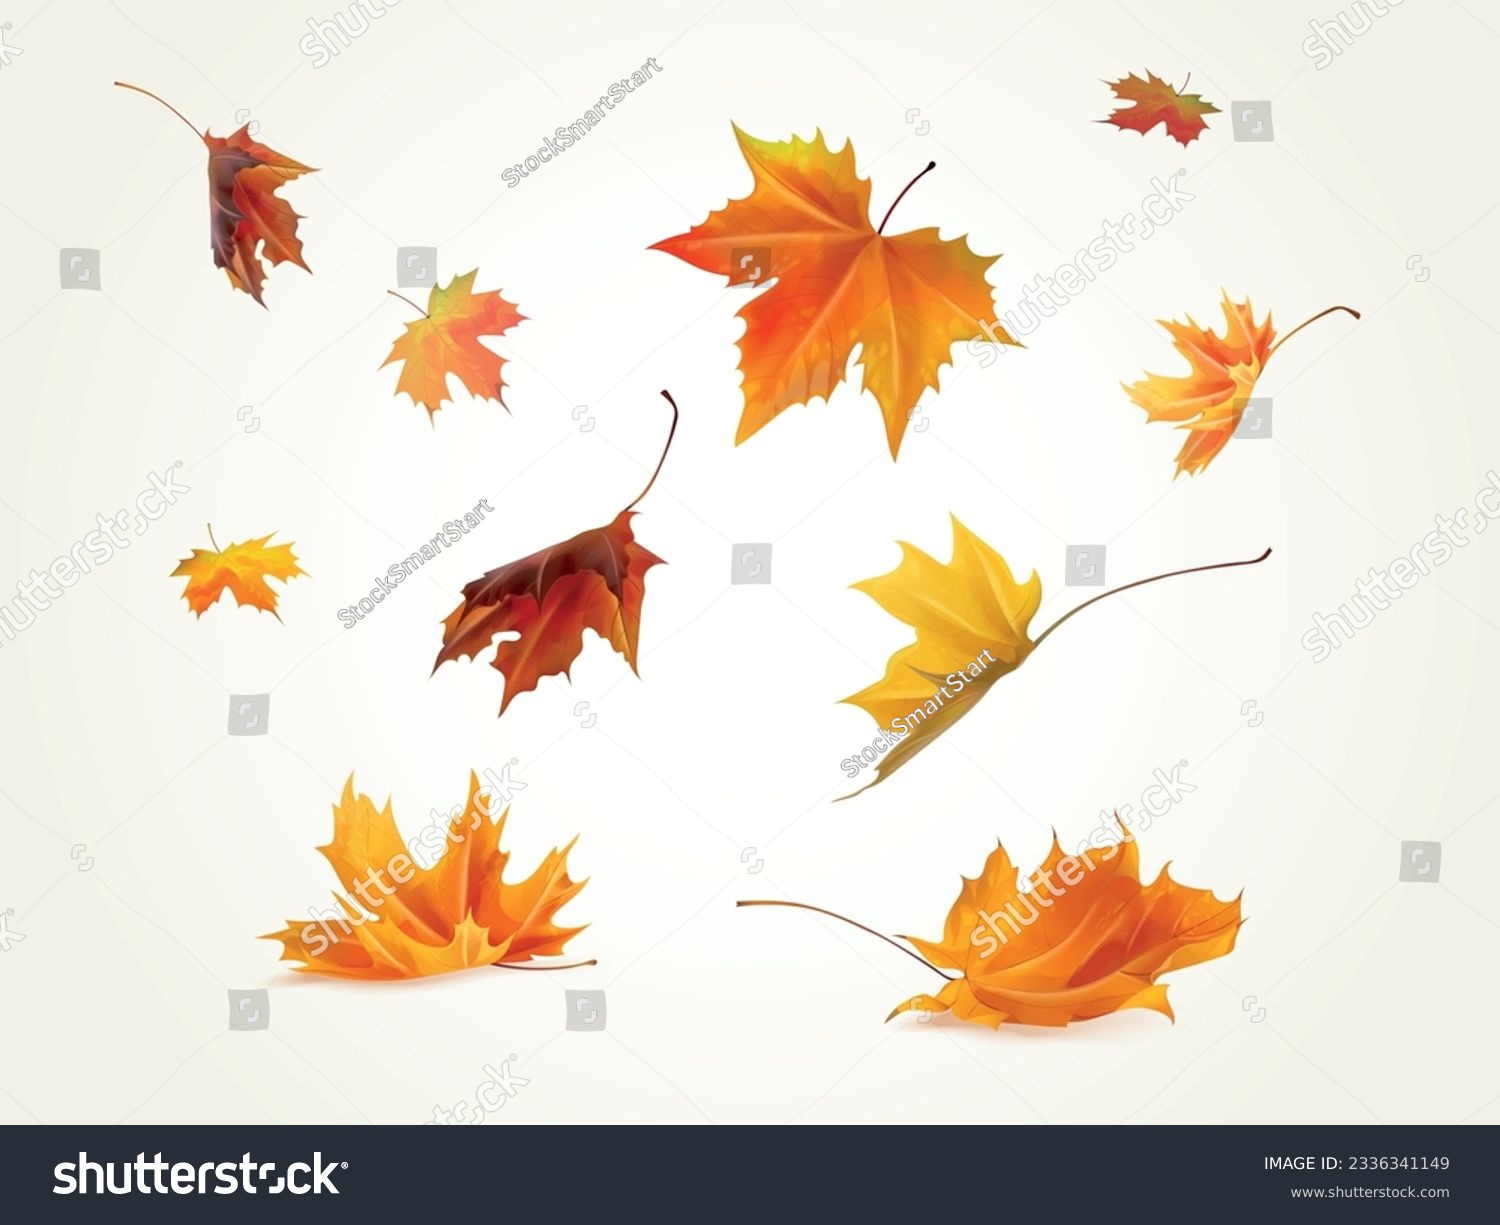 SVG of Realistic falling leaves. Autumn forest maple leaf in september season, flying orange foliage from tree on ground transparent background isolated template exact vector illustration of fall autumn svg